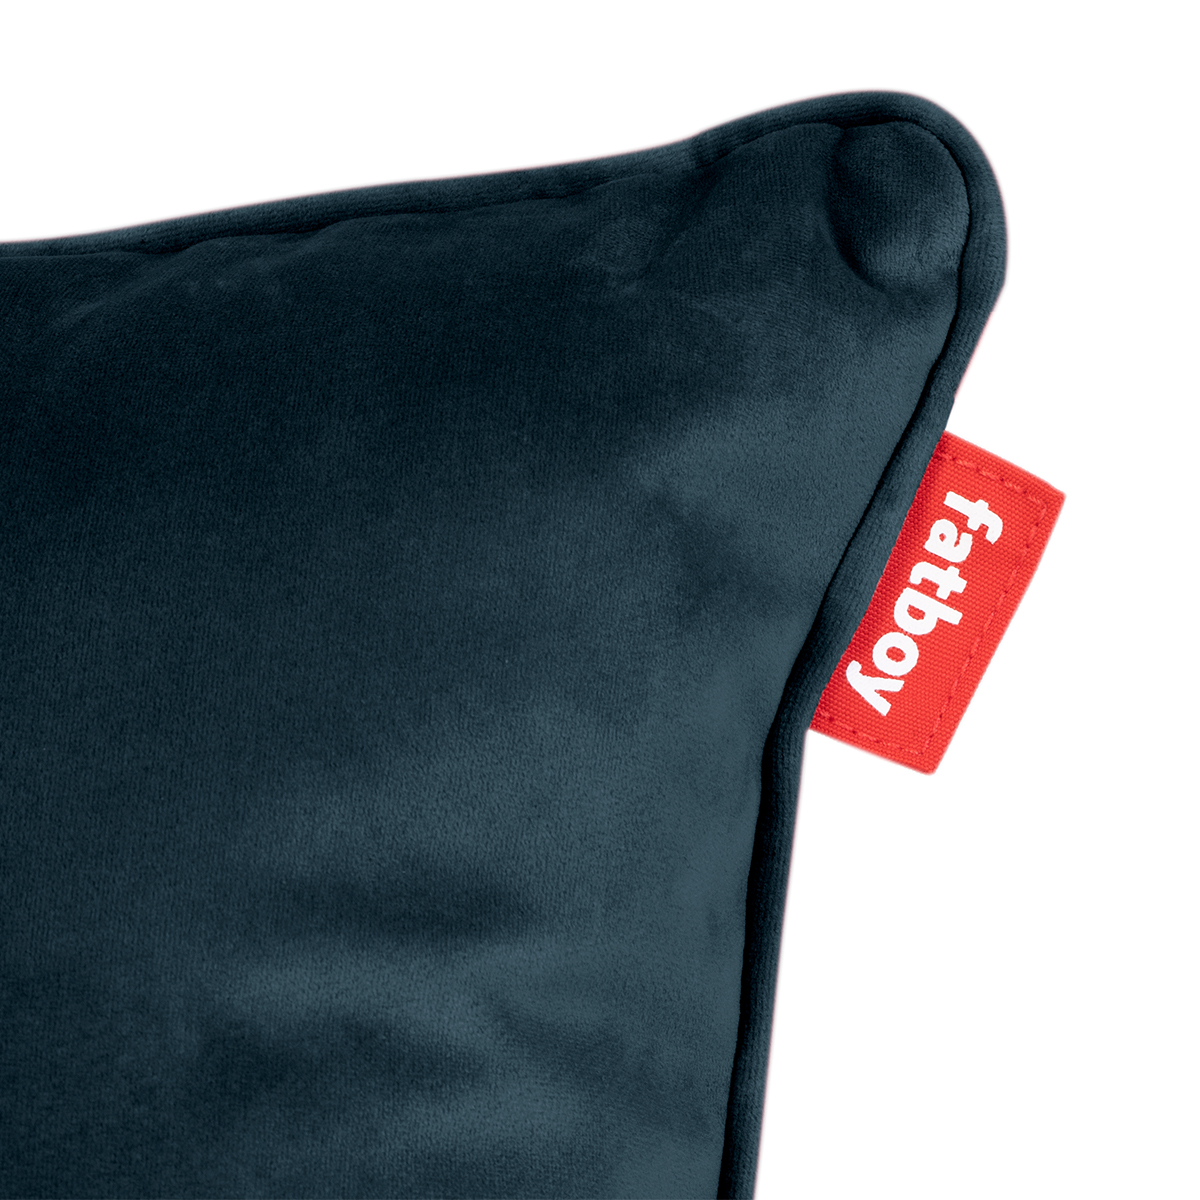 FATBOY pillow king velvet recycled close up night